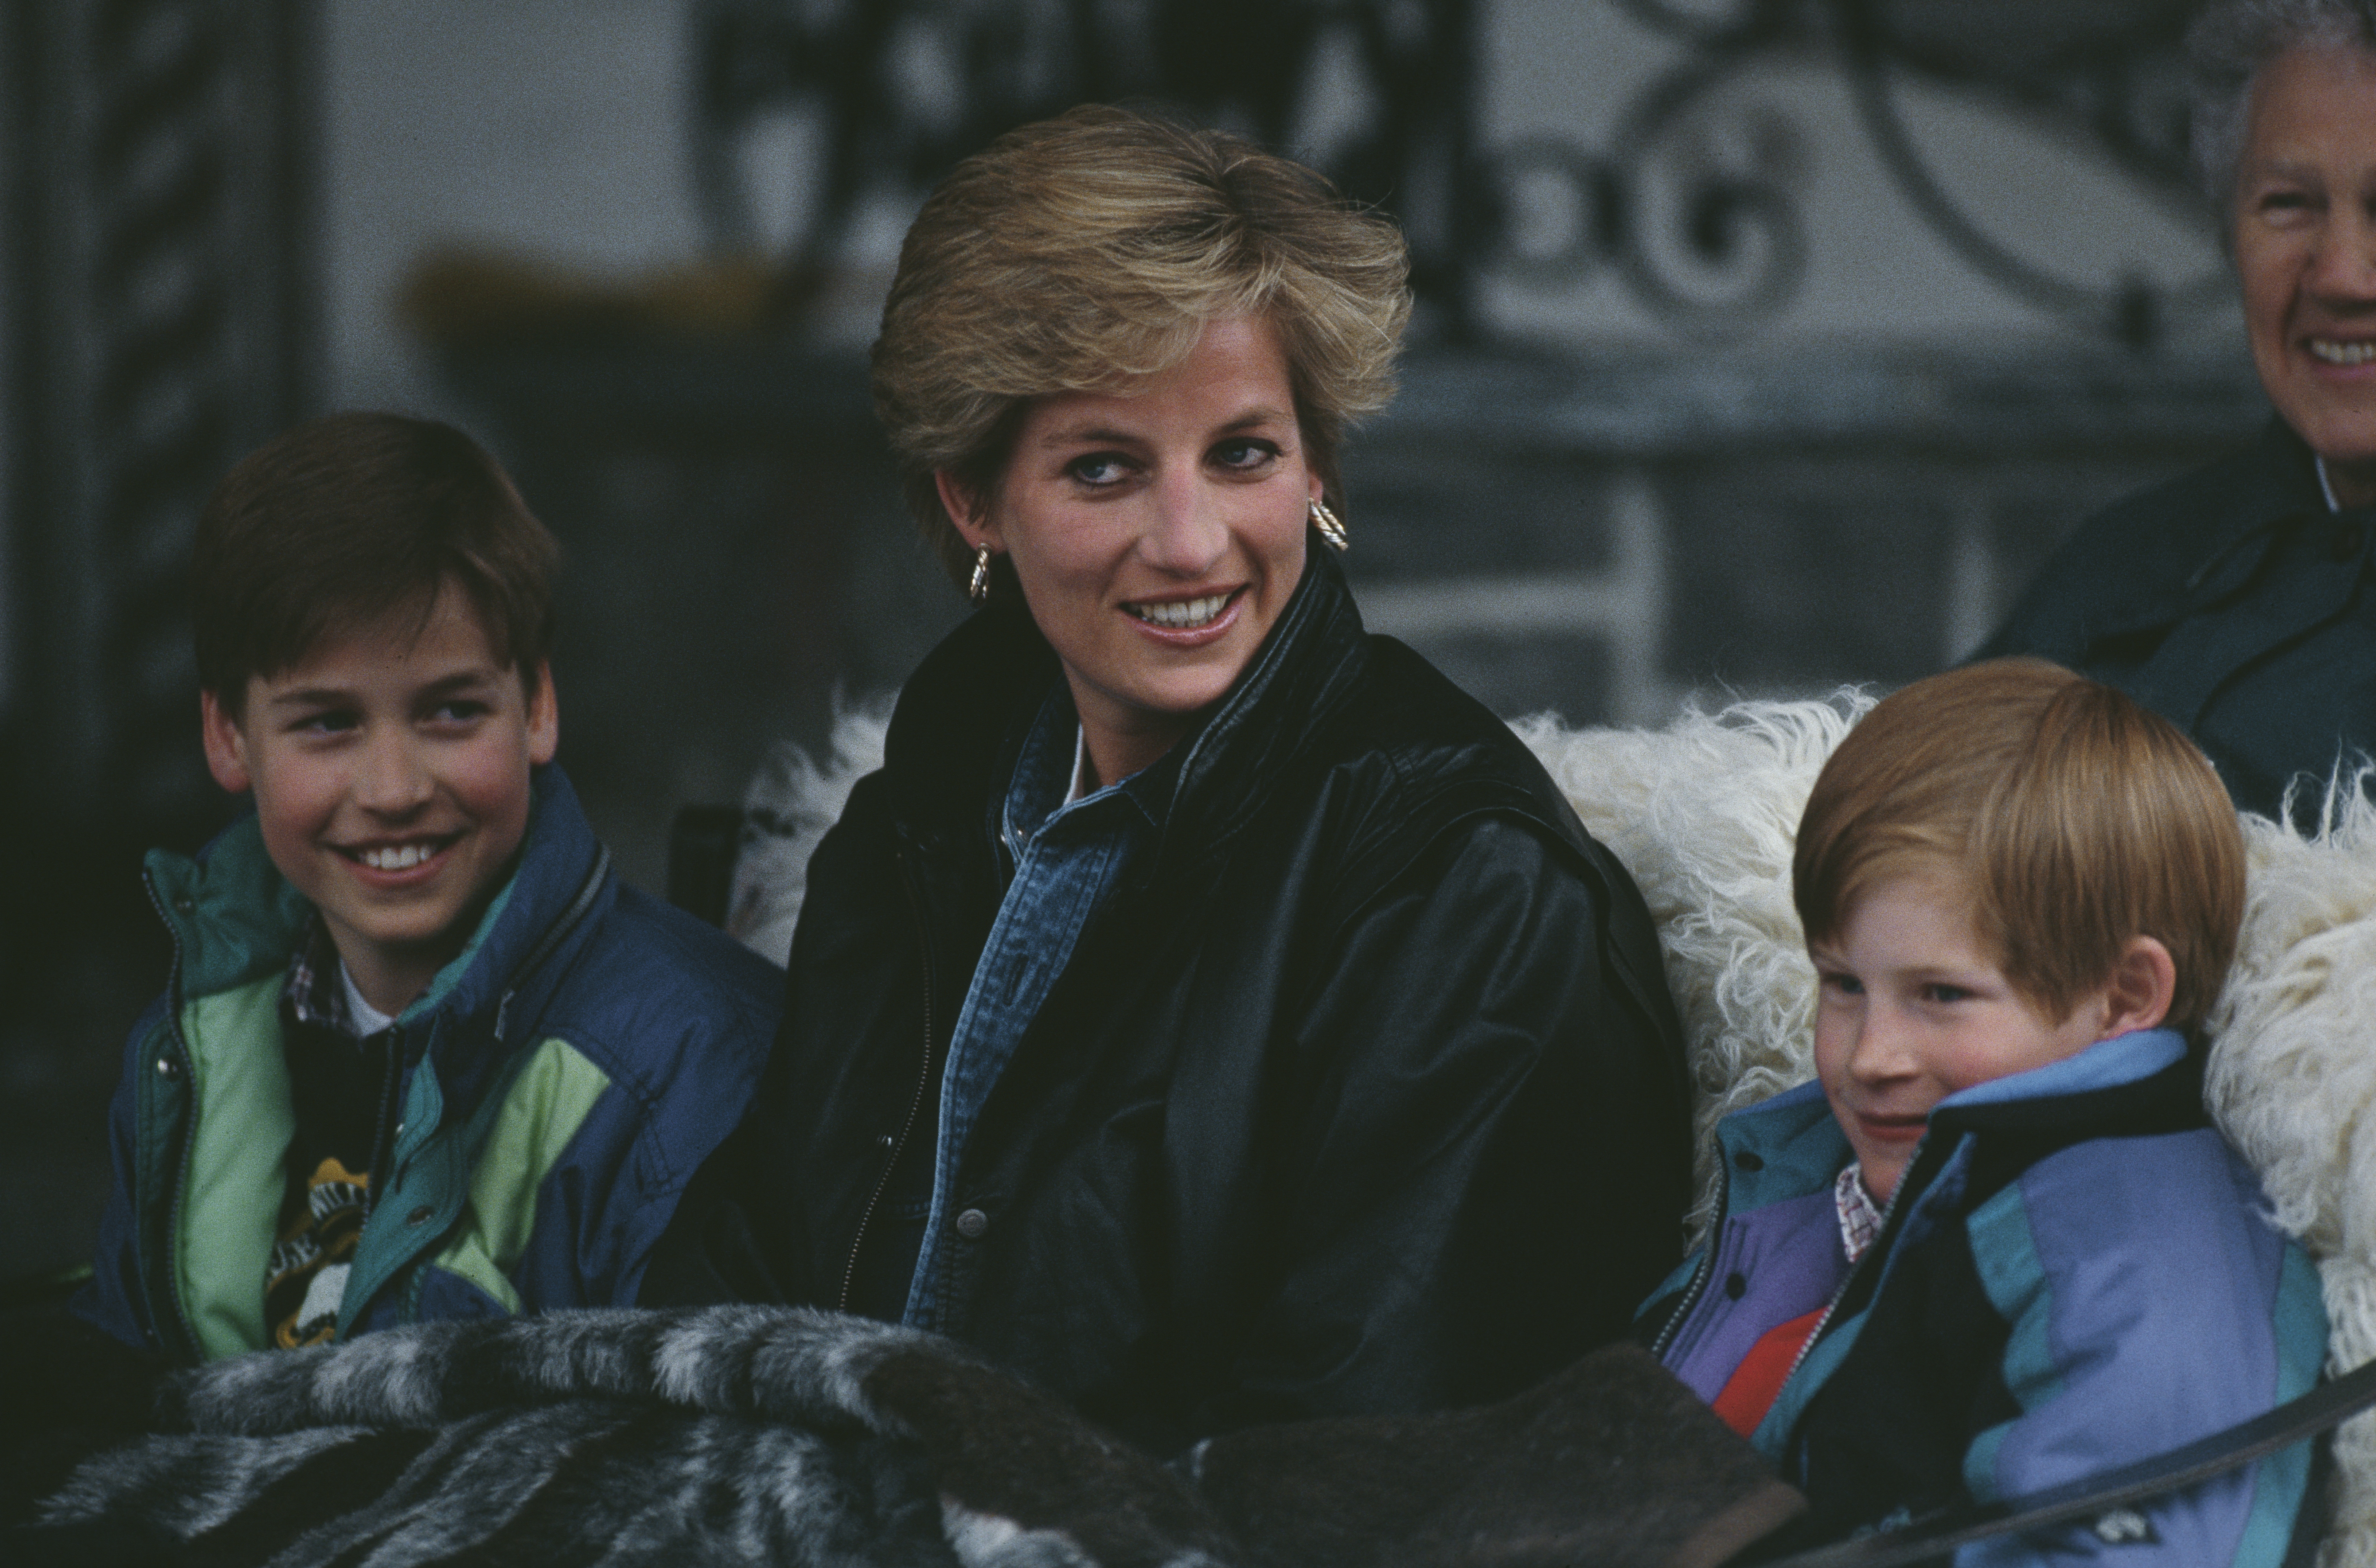 Prince William, Princess Diana and Prince Harry during their ski holiday in Lech, Austria on March 30, 1993 | Source: Getty Images